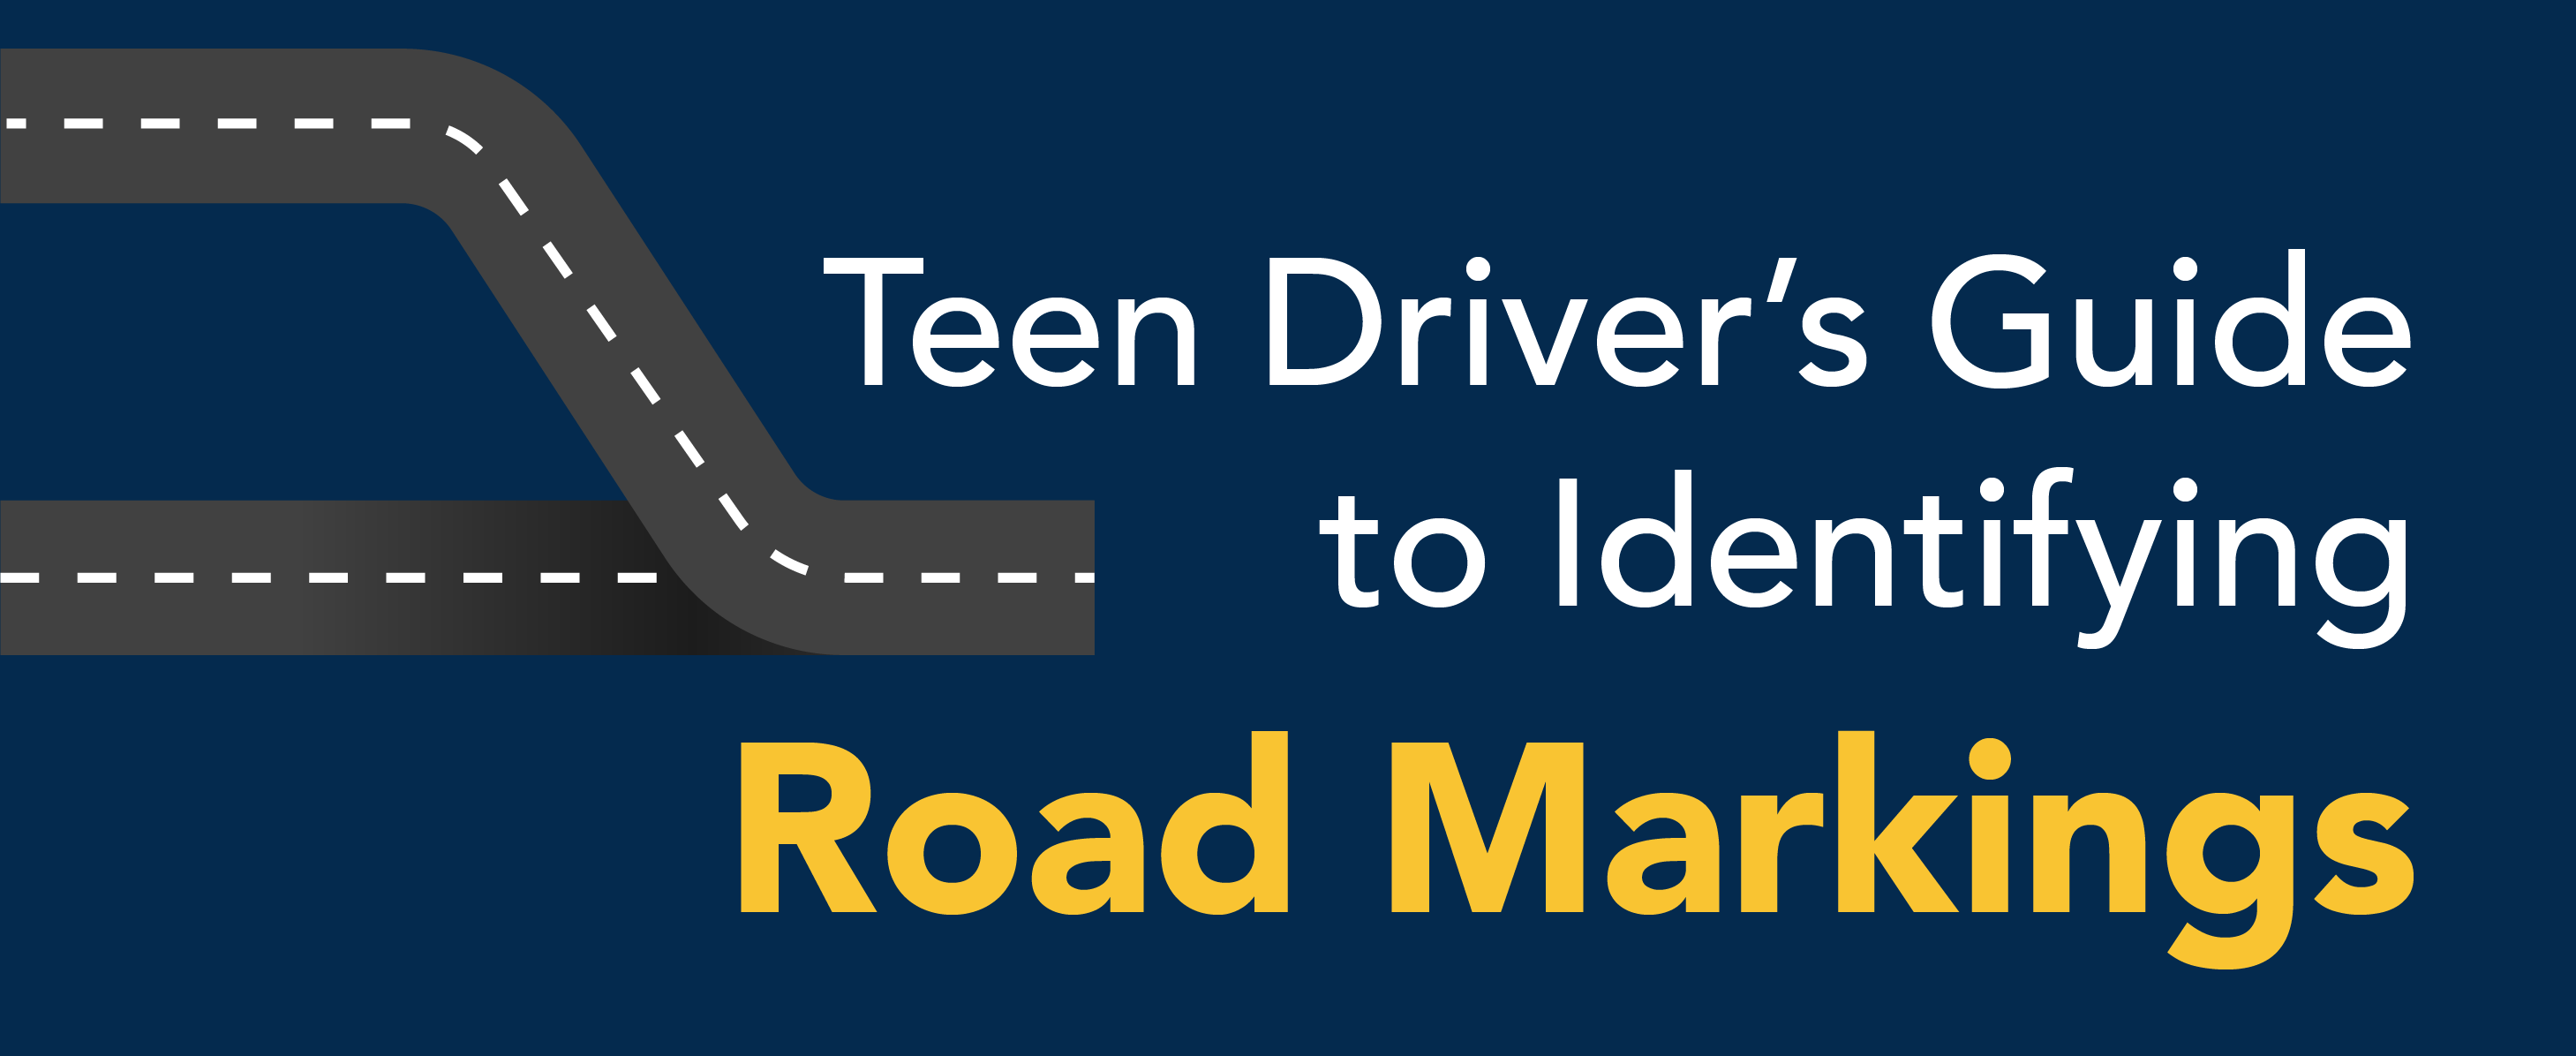 Teen driver's guide to identifying road markings